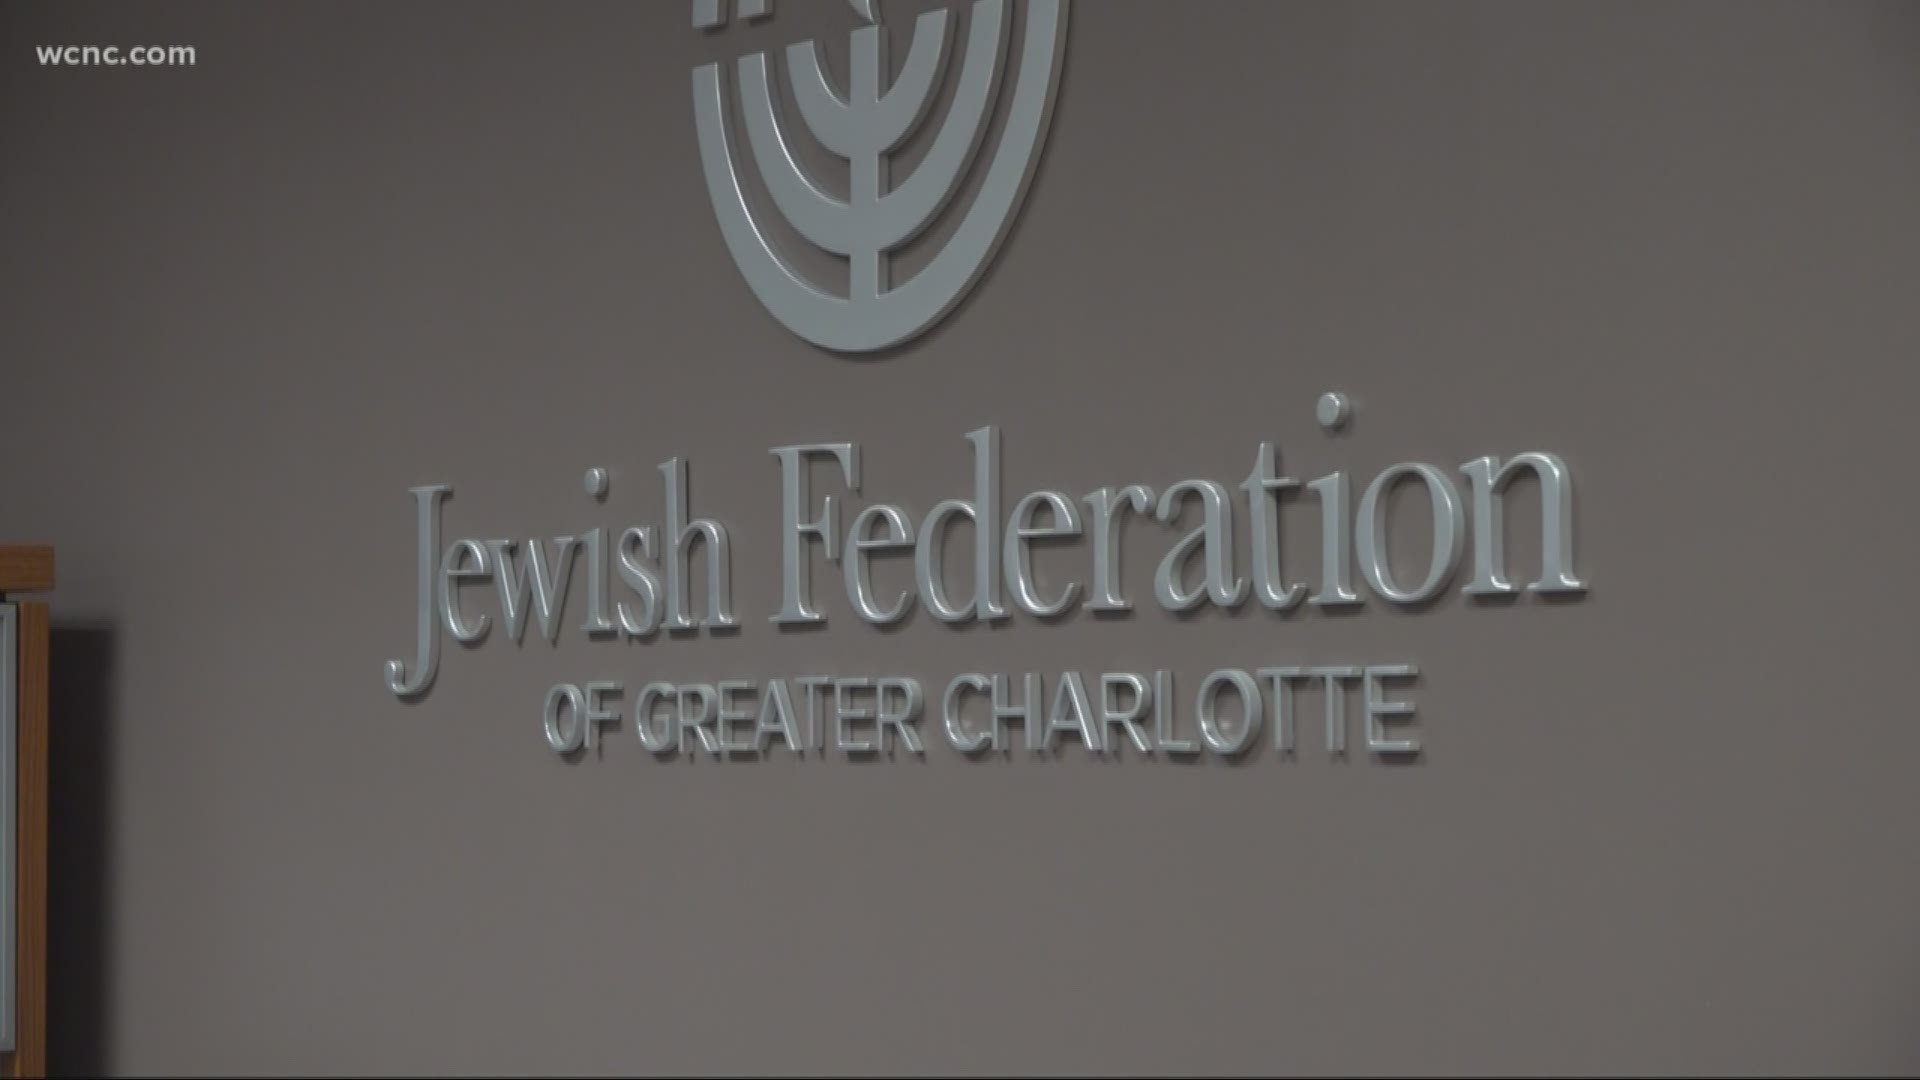 For now for the Jewish Federation of Greater Charlotte, it's tightened security and heightened awareness.